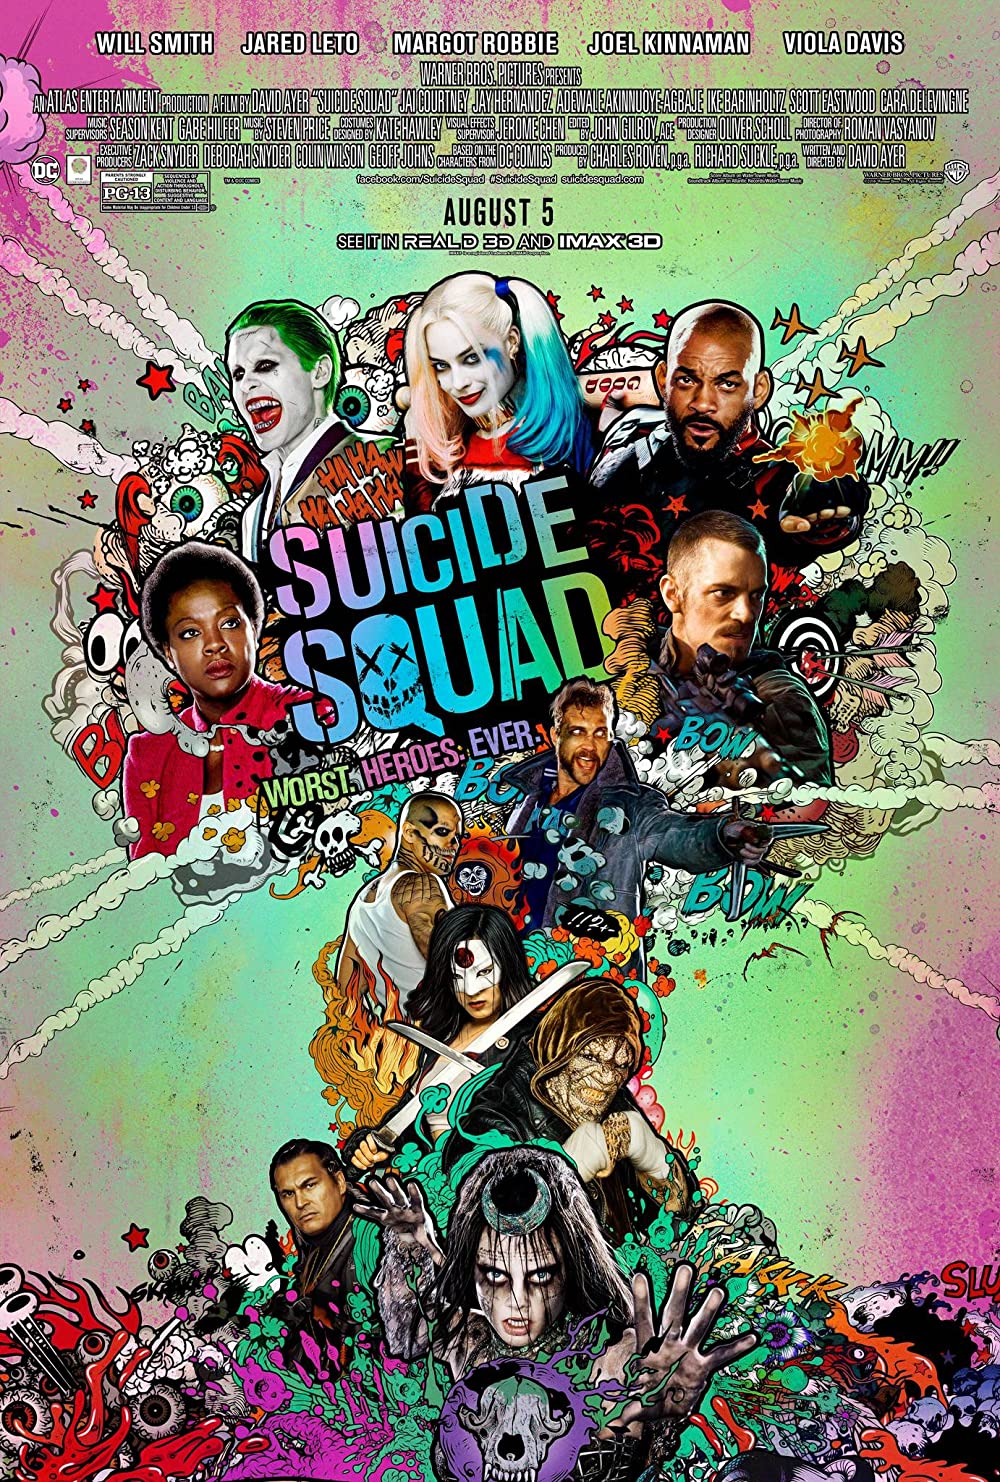 Harley Quinn Hd Suicide Squad Dc Art Wallpapers